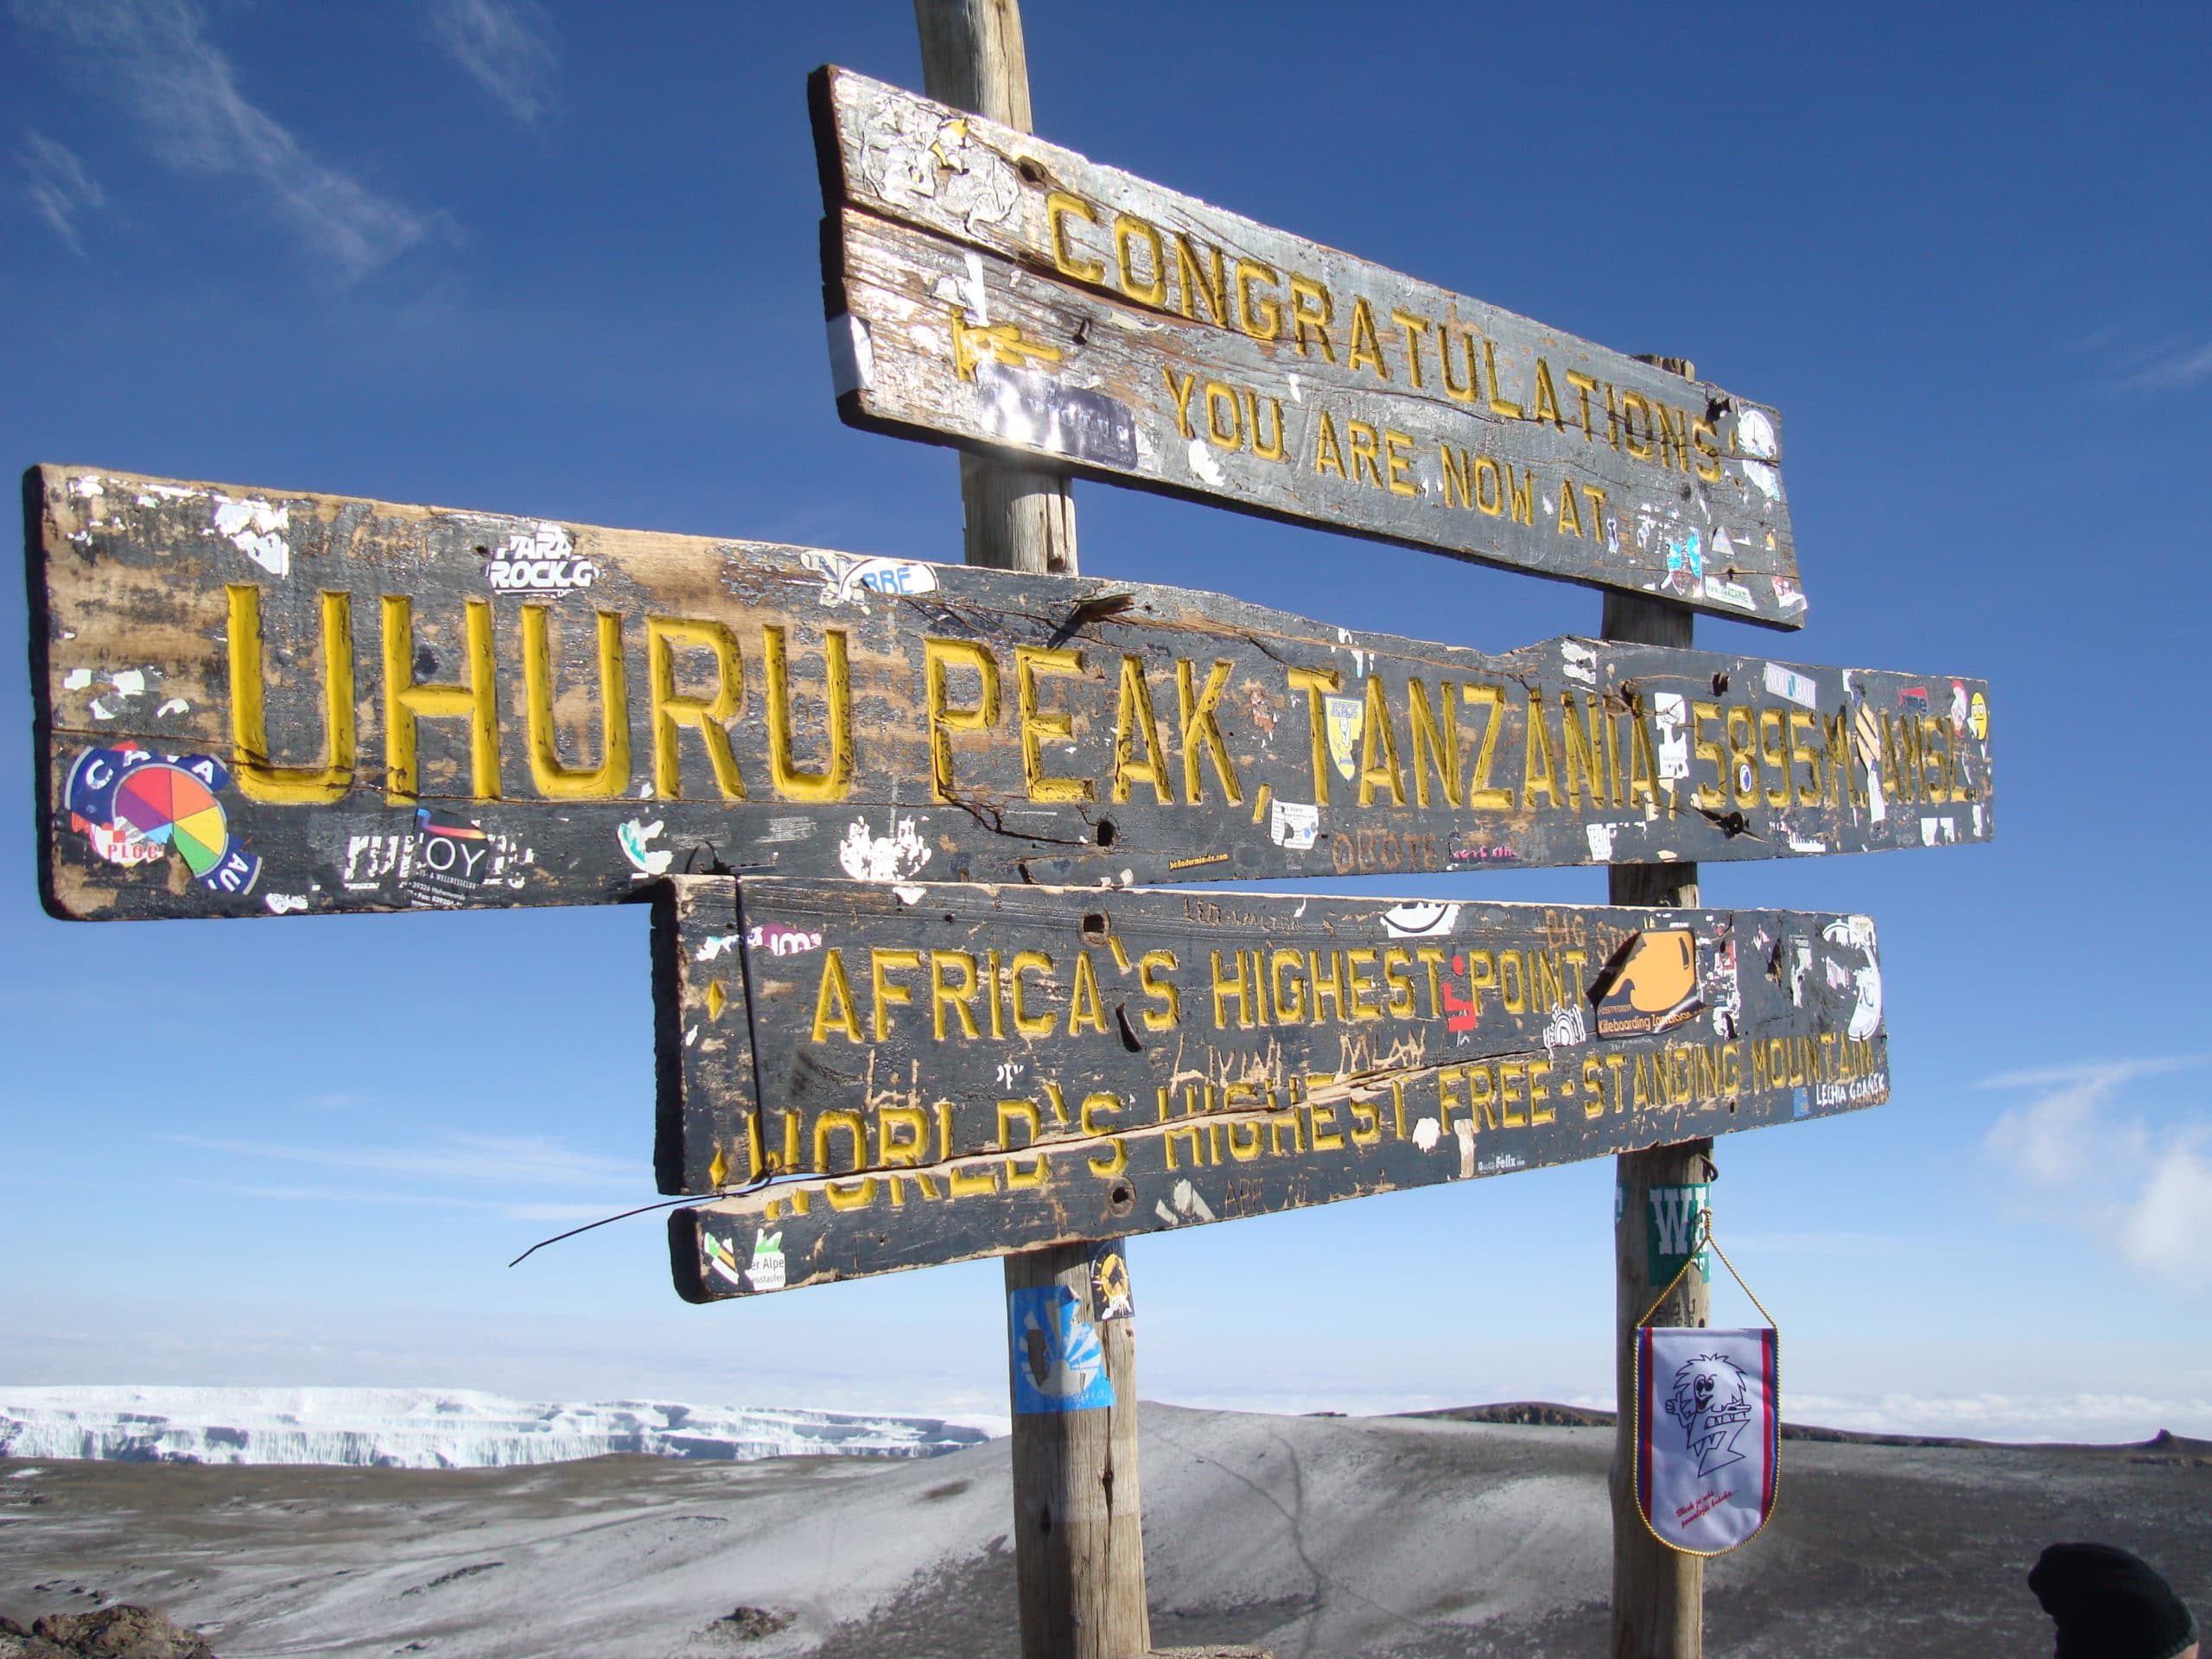 The sign on the top of Kilimanjaro